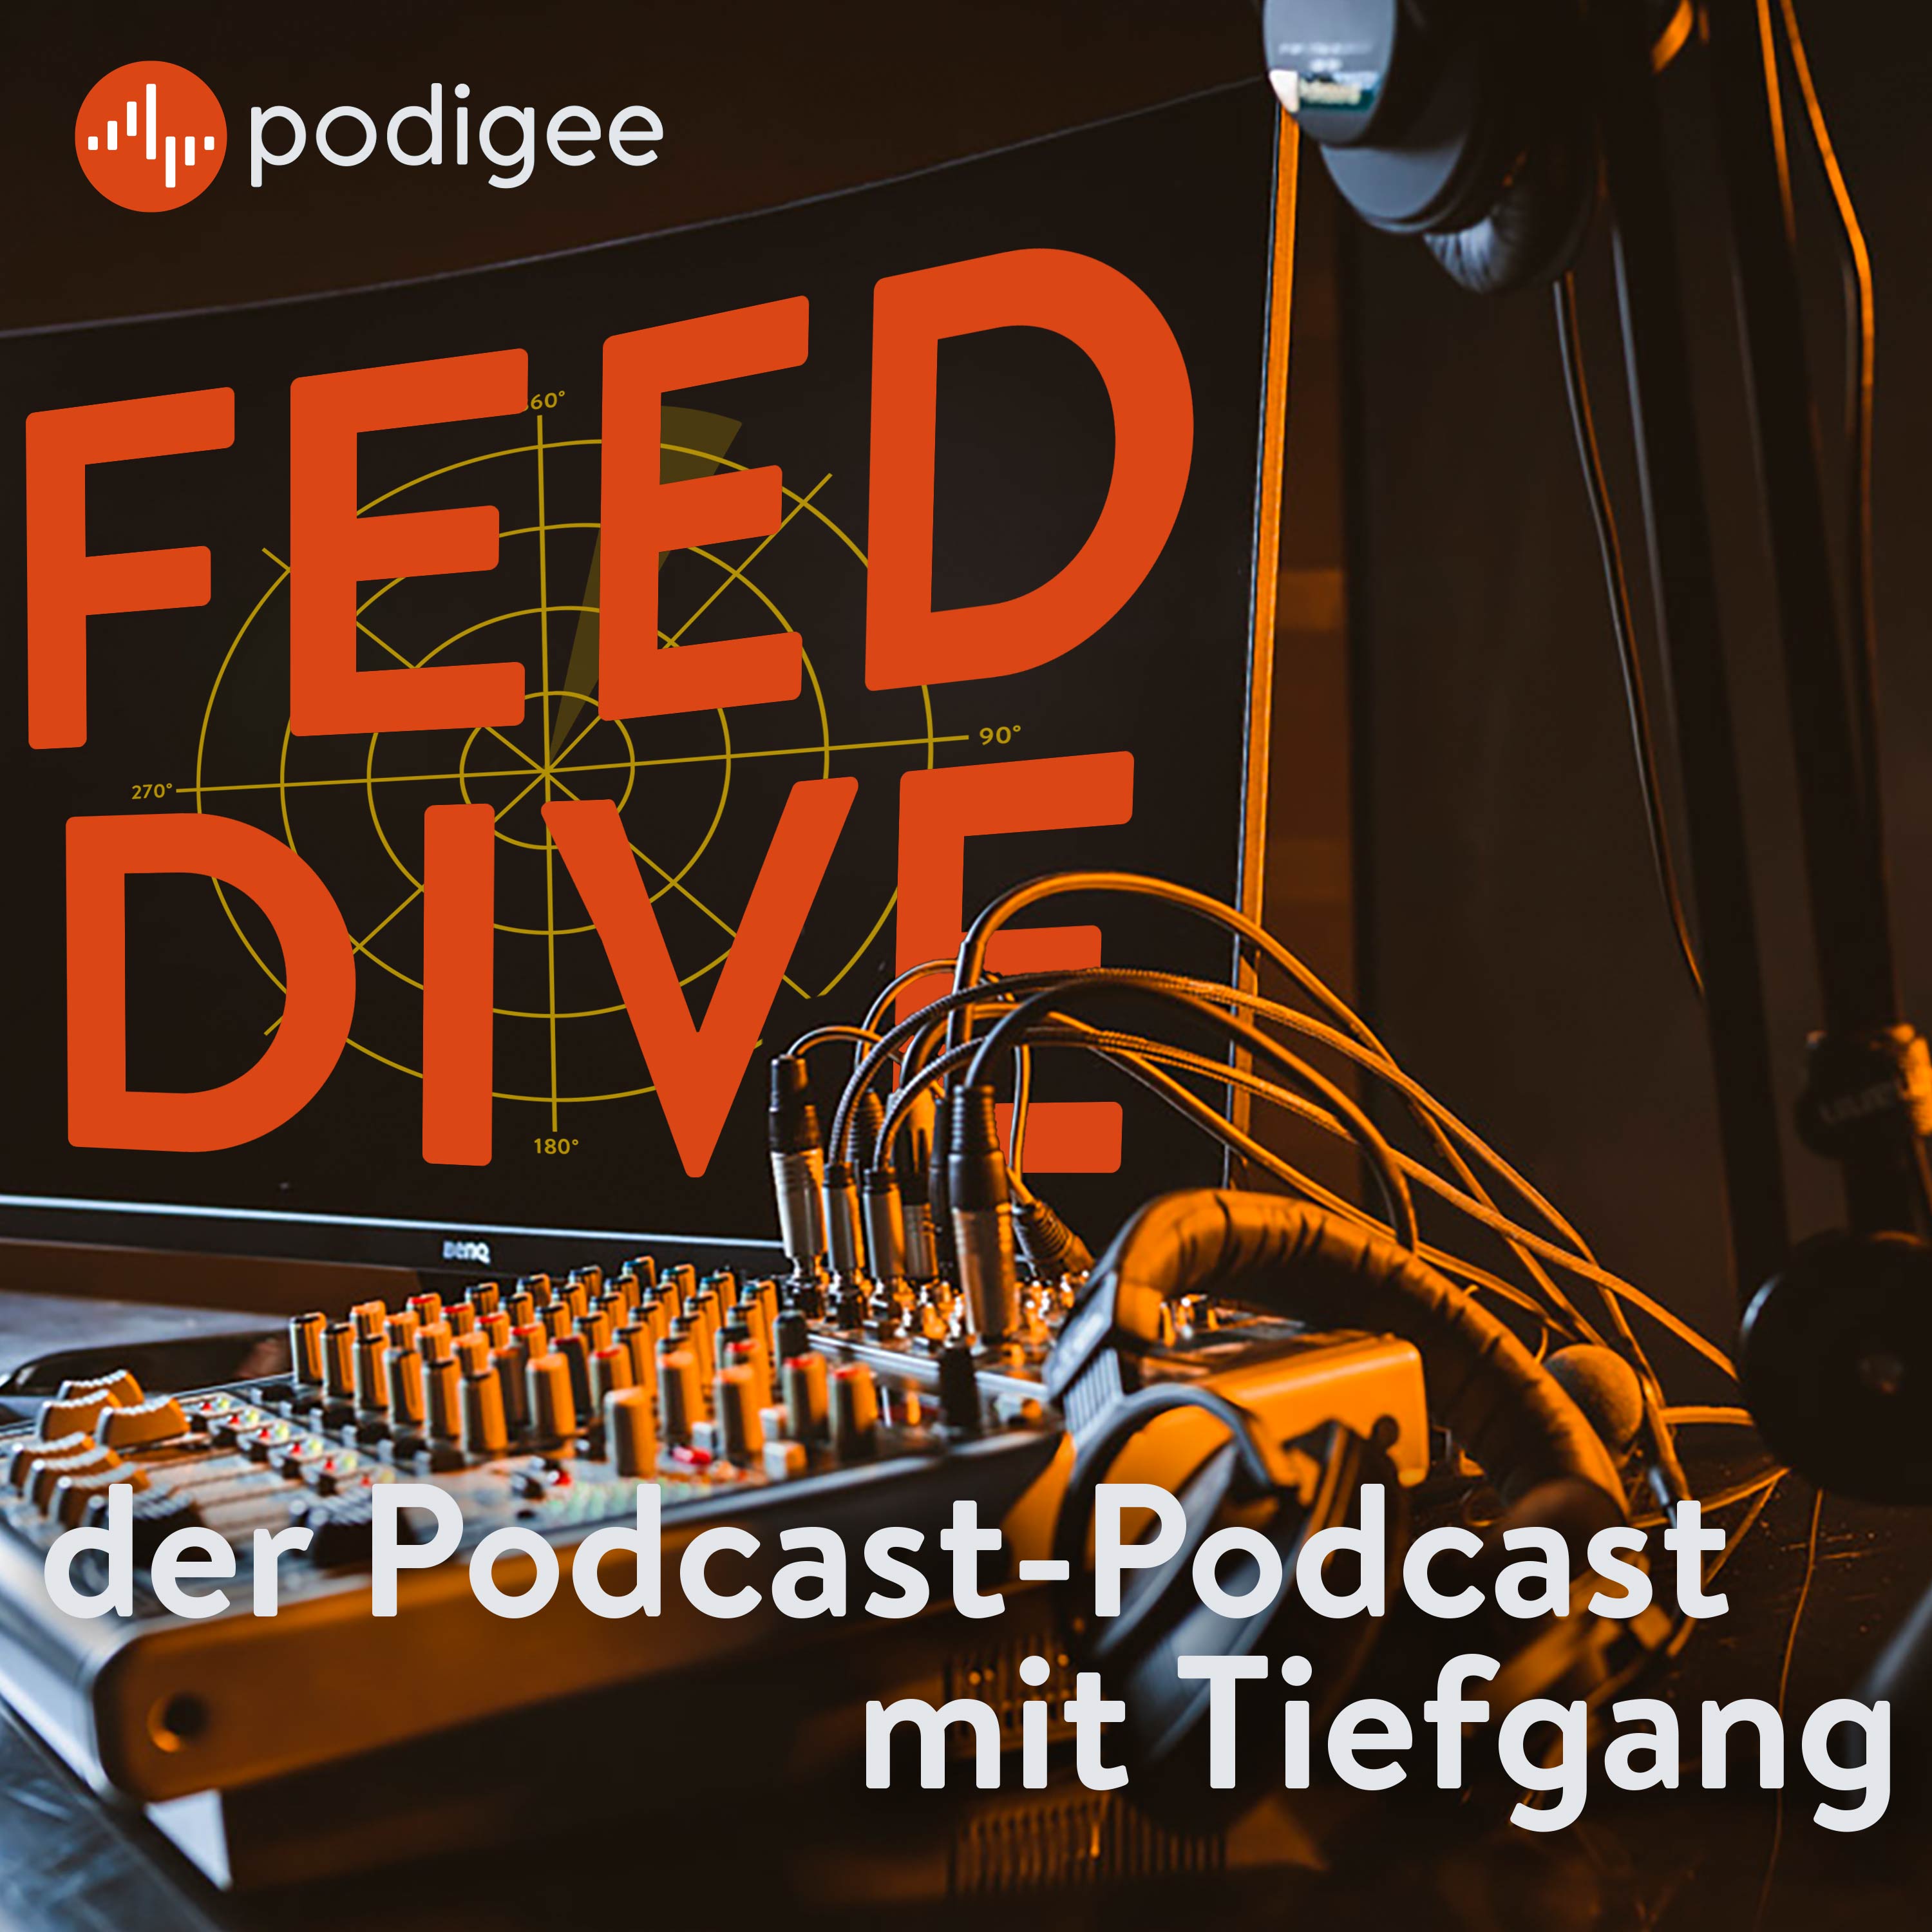 FEED DIVE der Podcast-Podcast mit Tiefgang